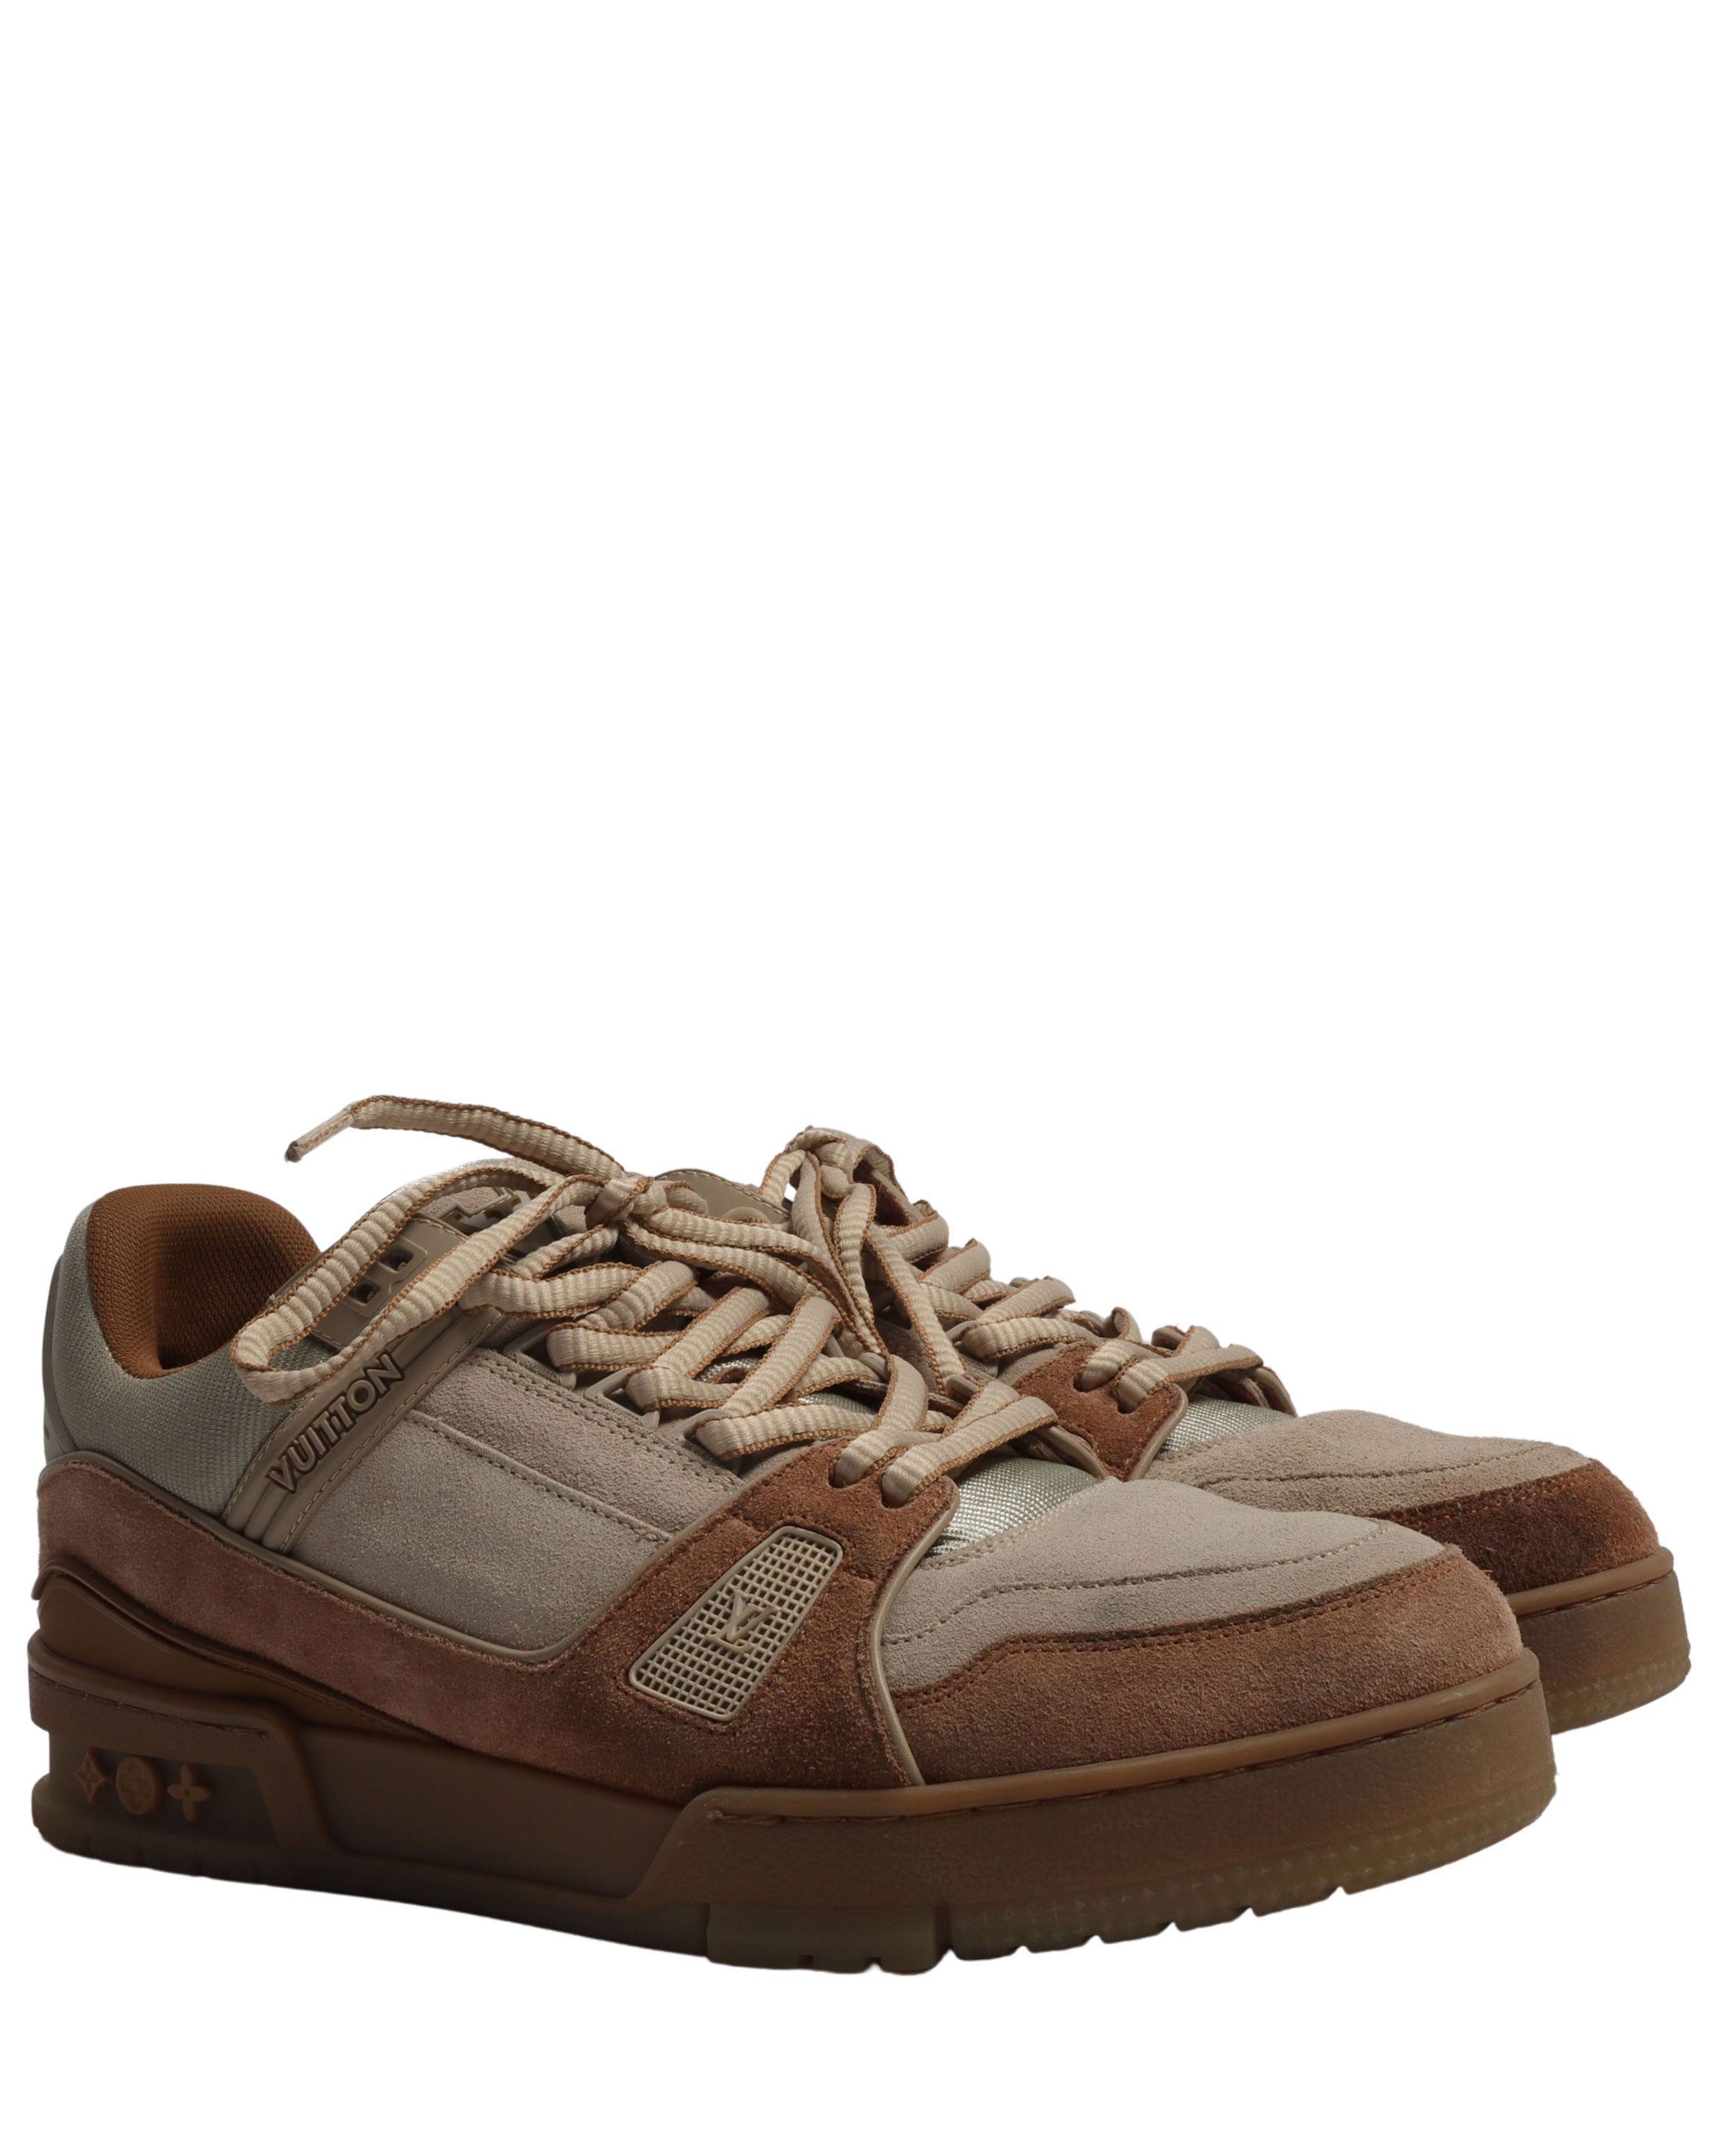 LOUIS VUITTON Lv Trainer Low Trainers In Brown/Beige BM0159